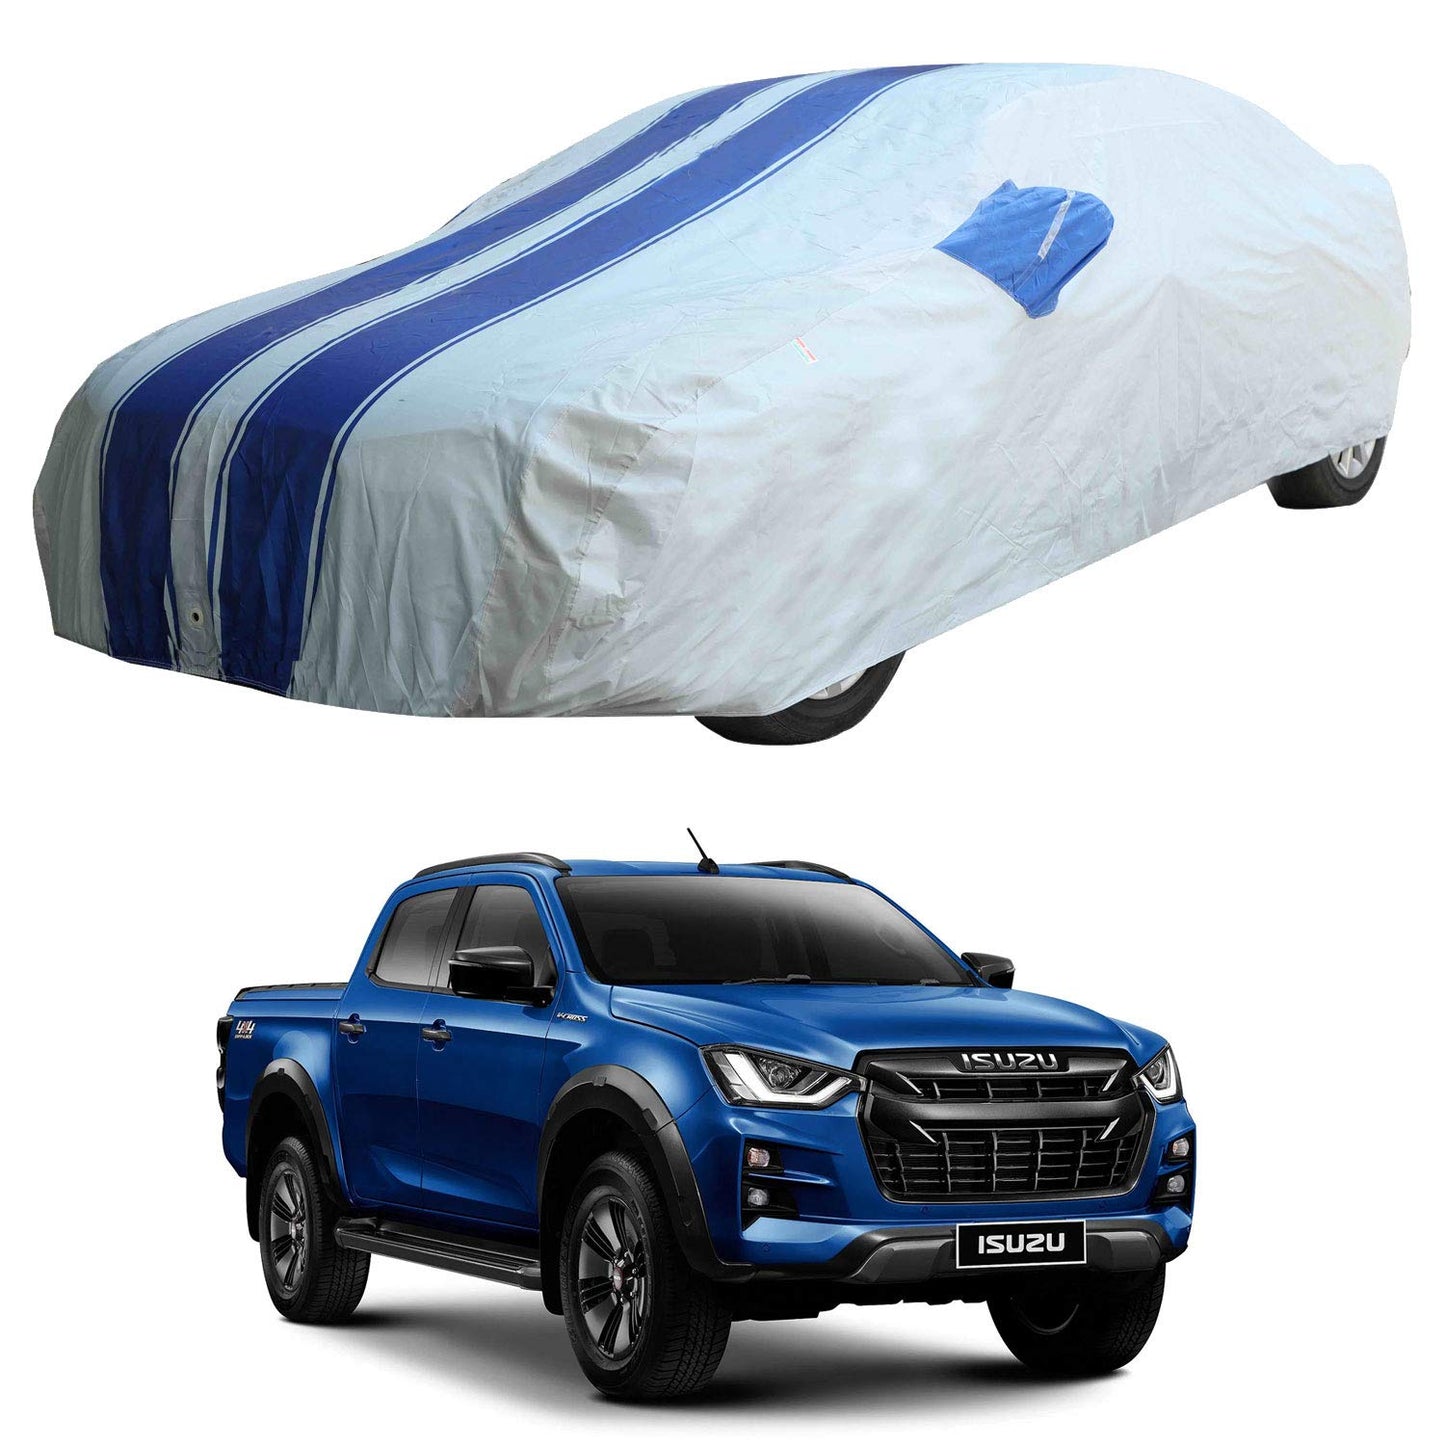 Oshotto 100% Blue dustproof and Water Resistant Car Body Cover with Mirror Pockets For Isuzu D-Max V-Cross